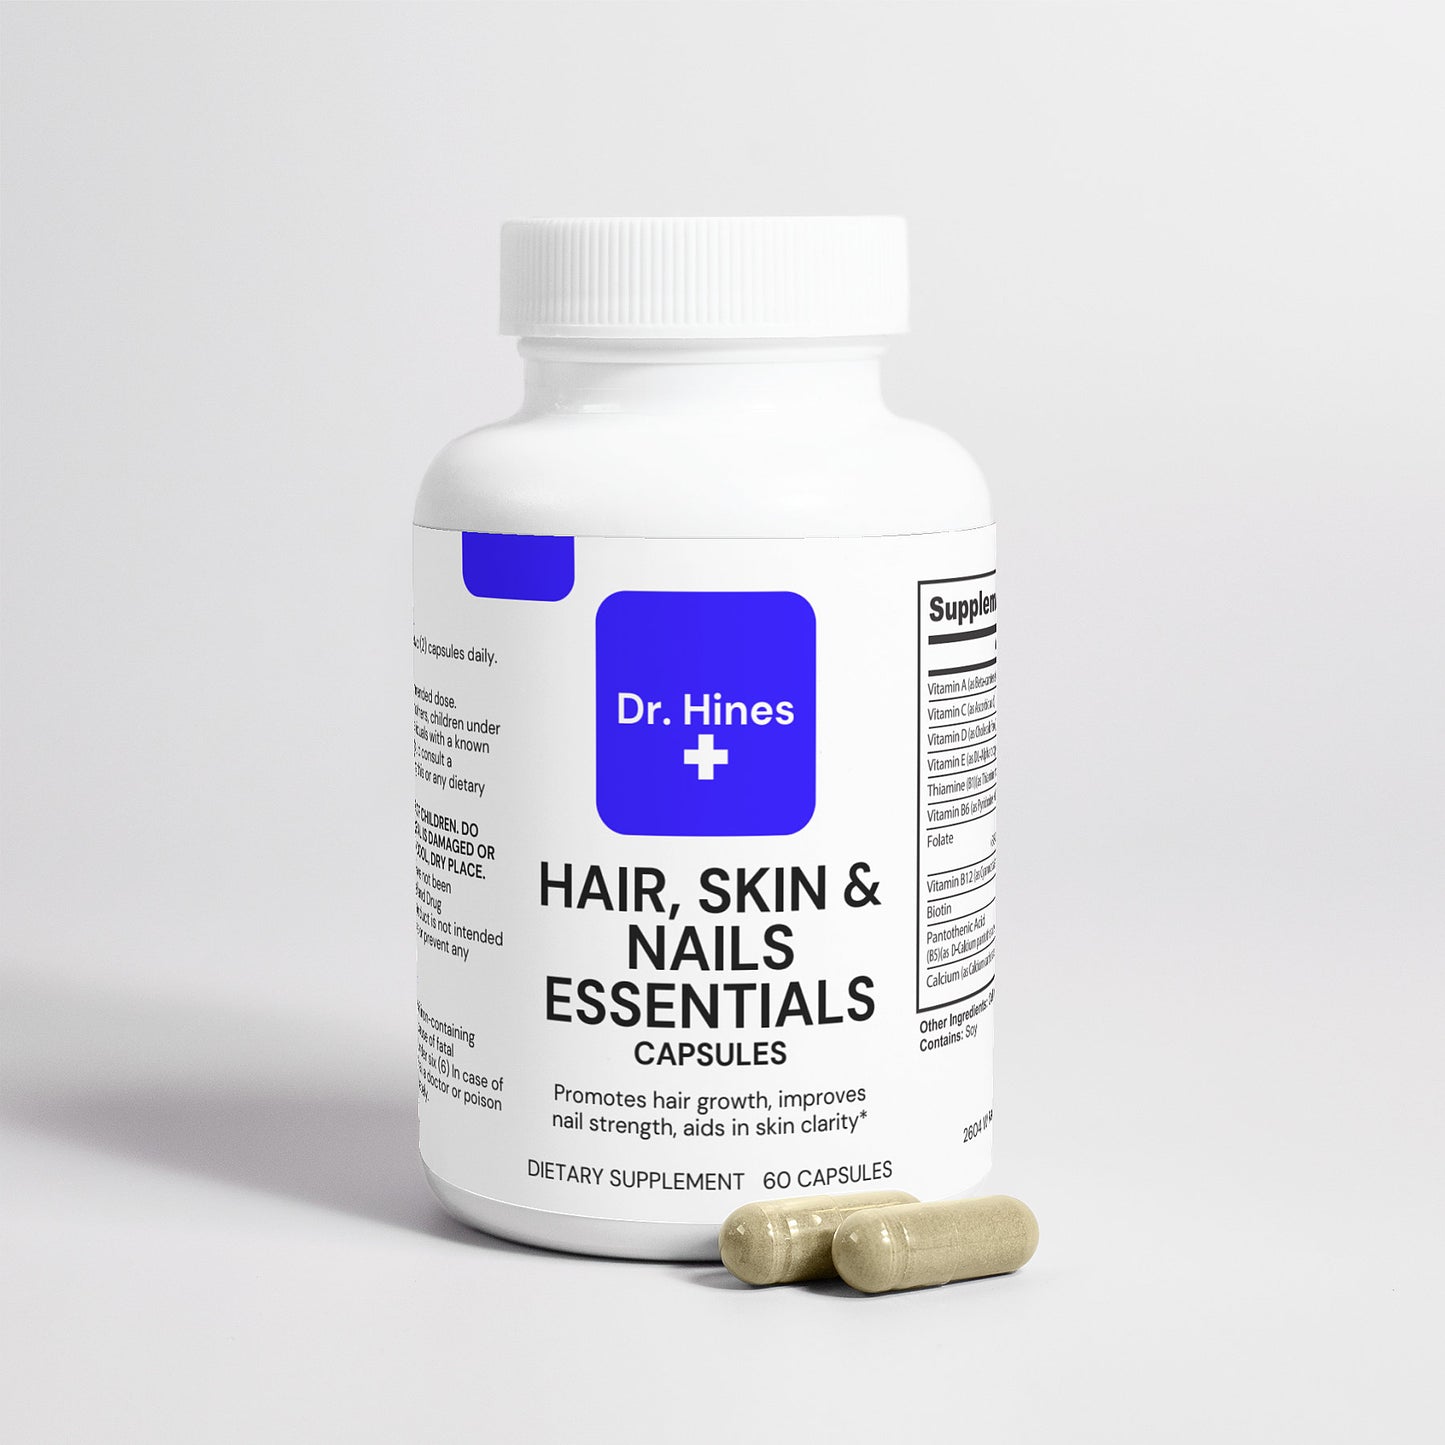 Dr. Hines Hair, Skin and Nails Essentials